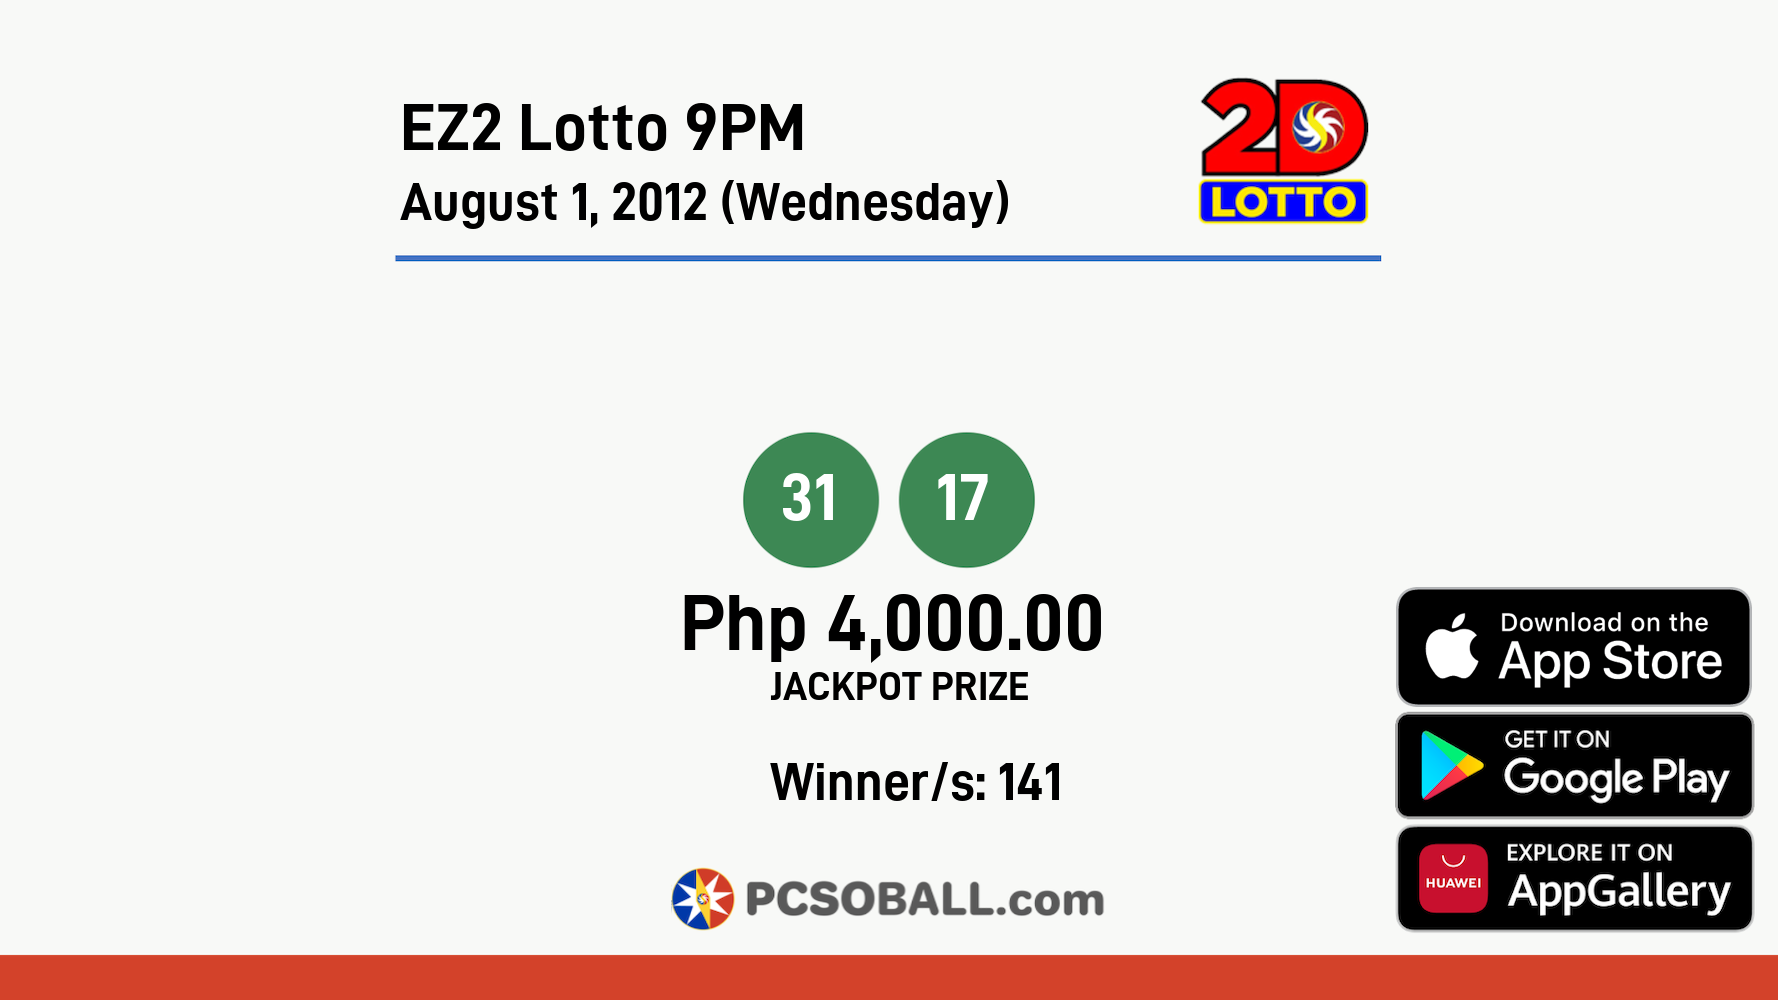 EZ2 Lotto 9PM August 1, 2012 (Wednesday) Result